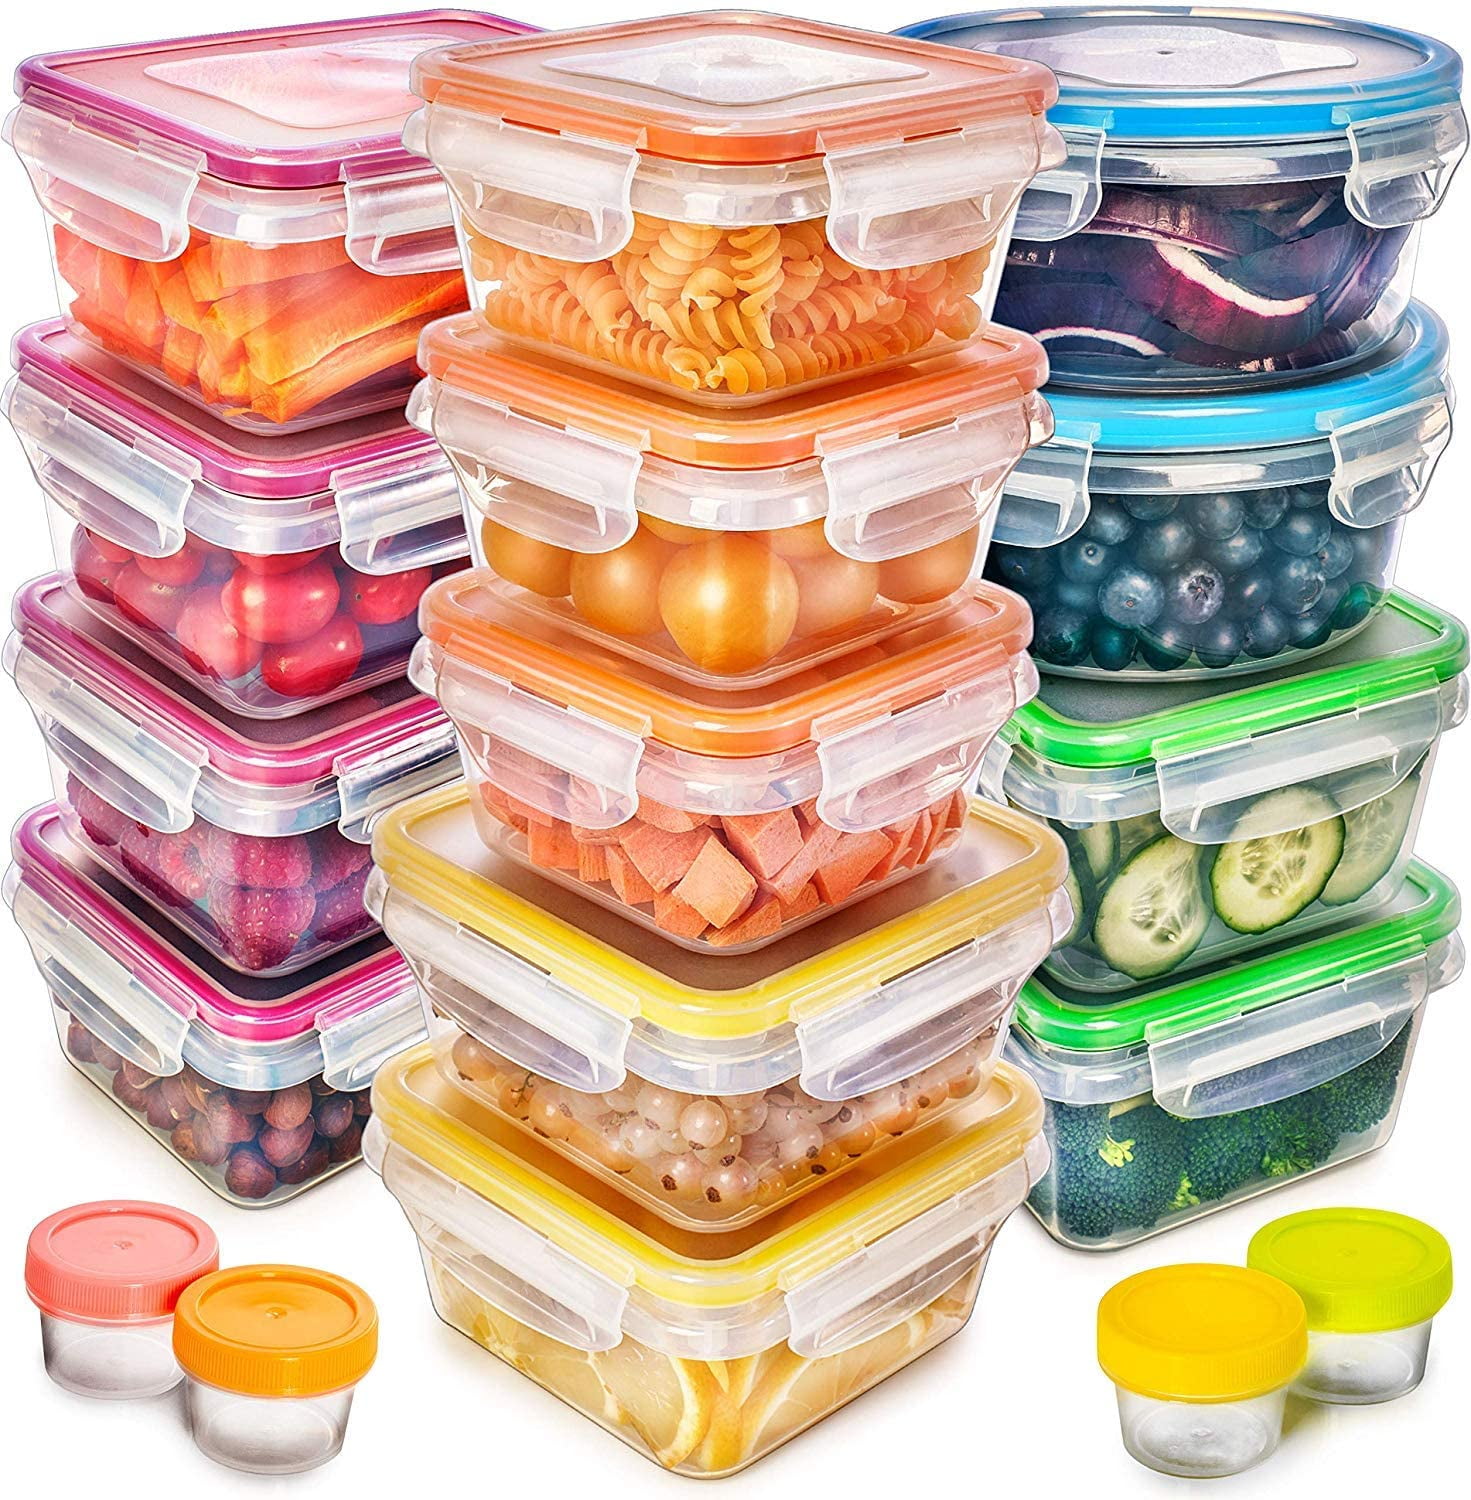 Fullstar Food Storage Containers with Lids Plastic Food